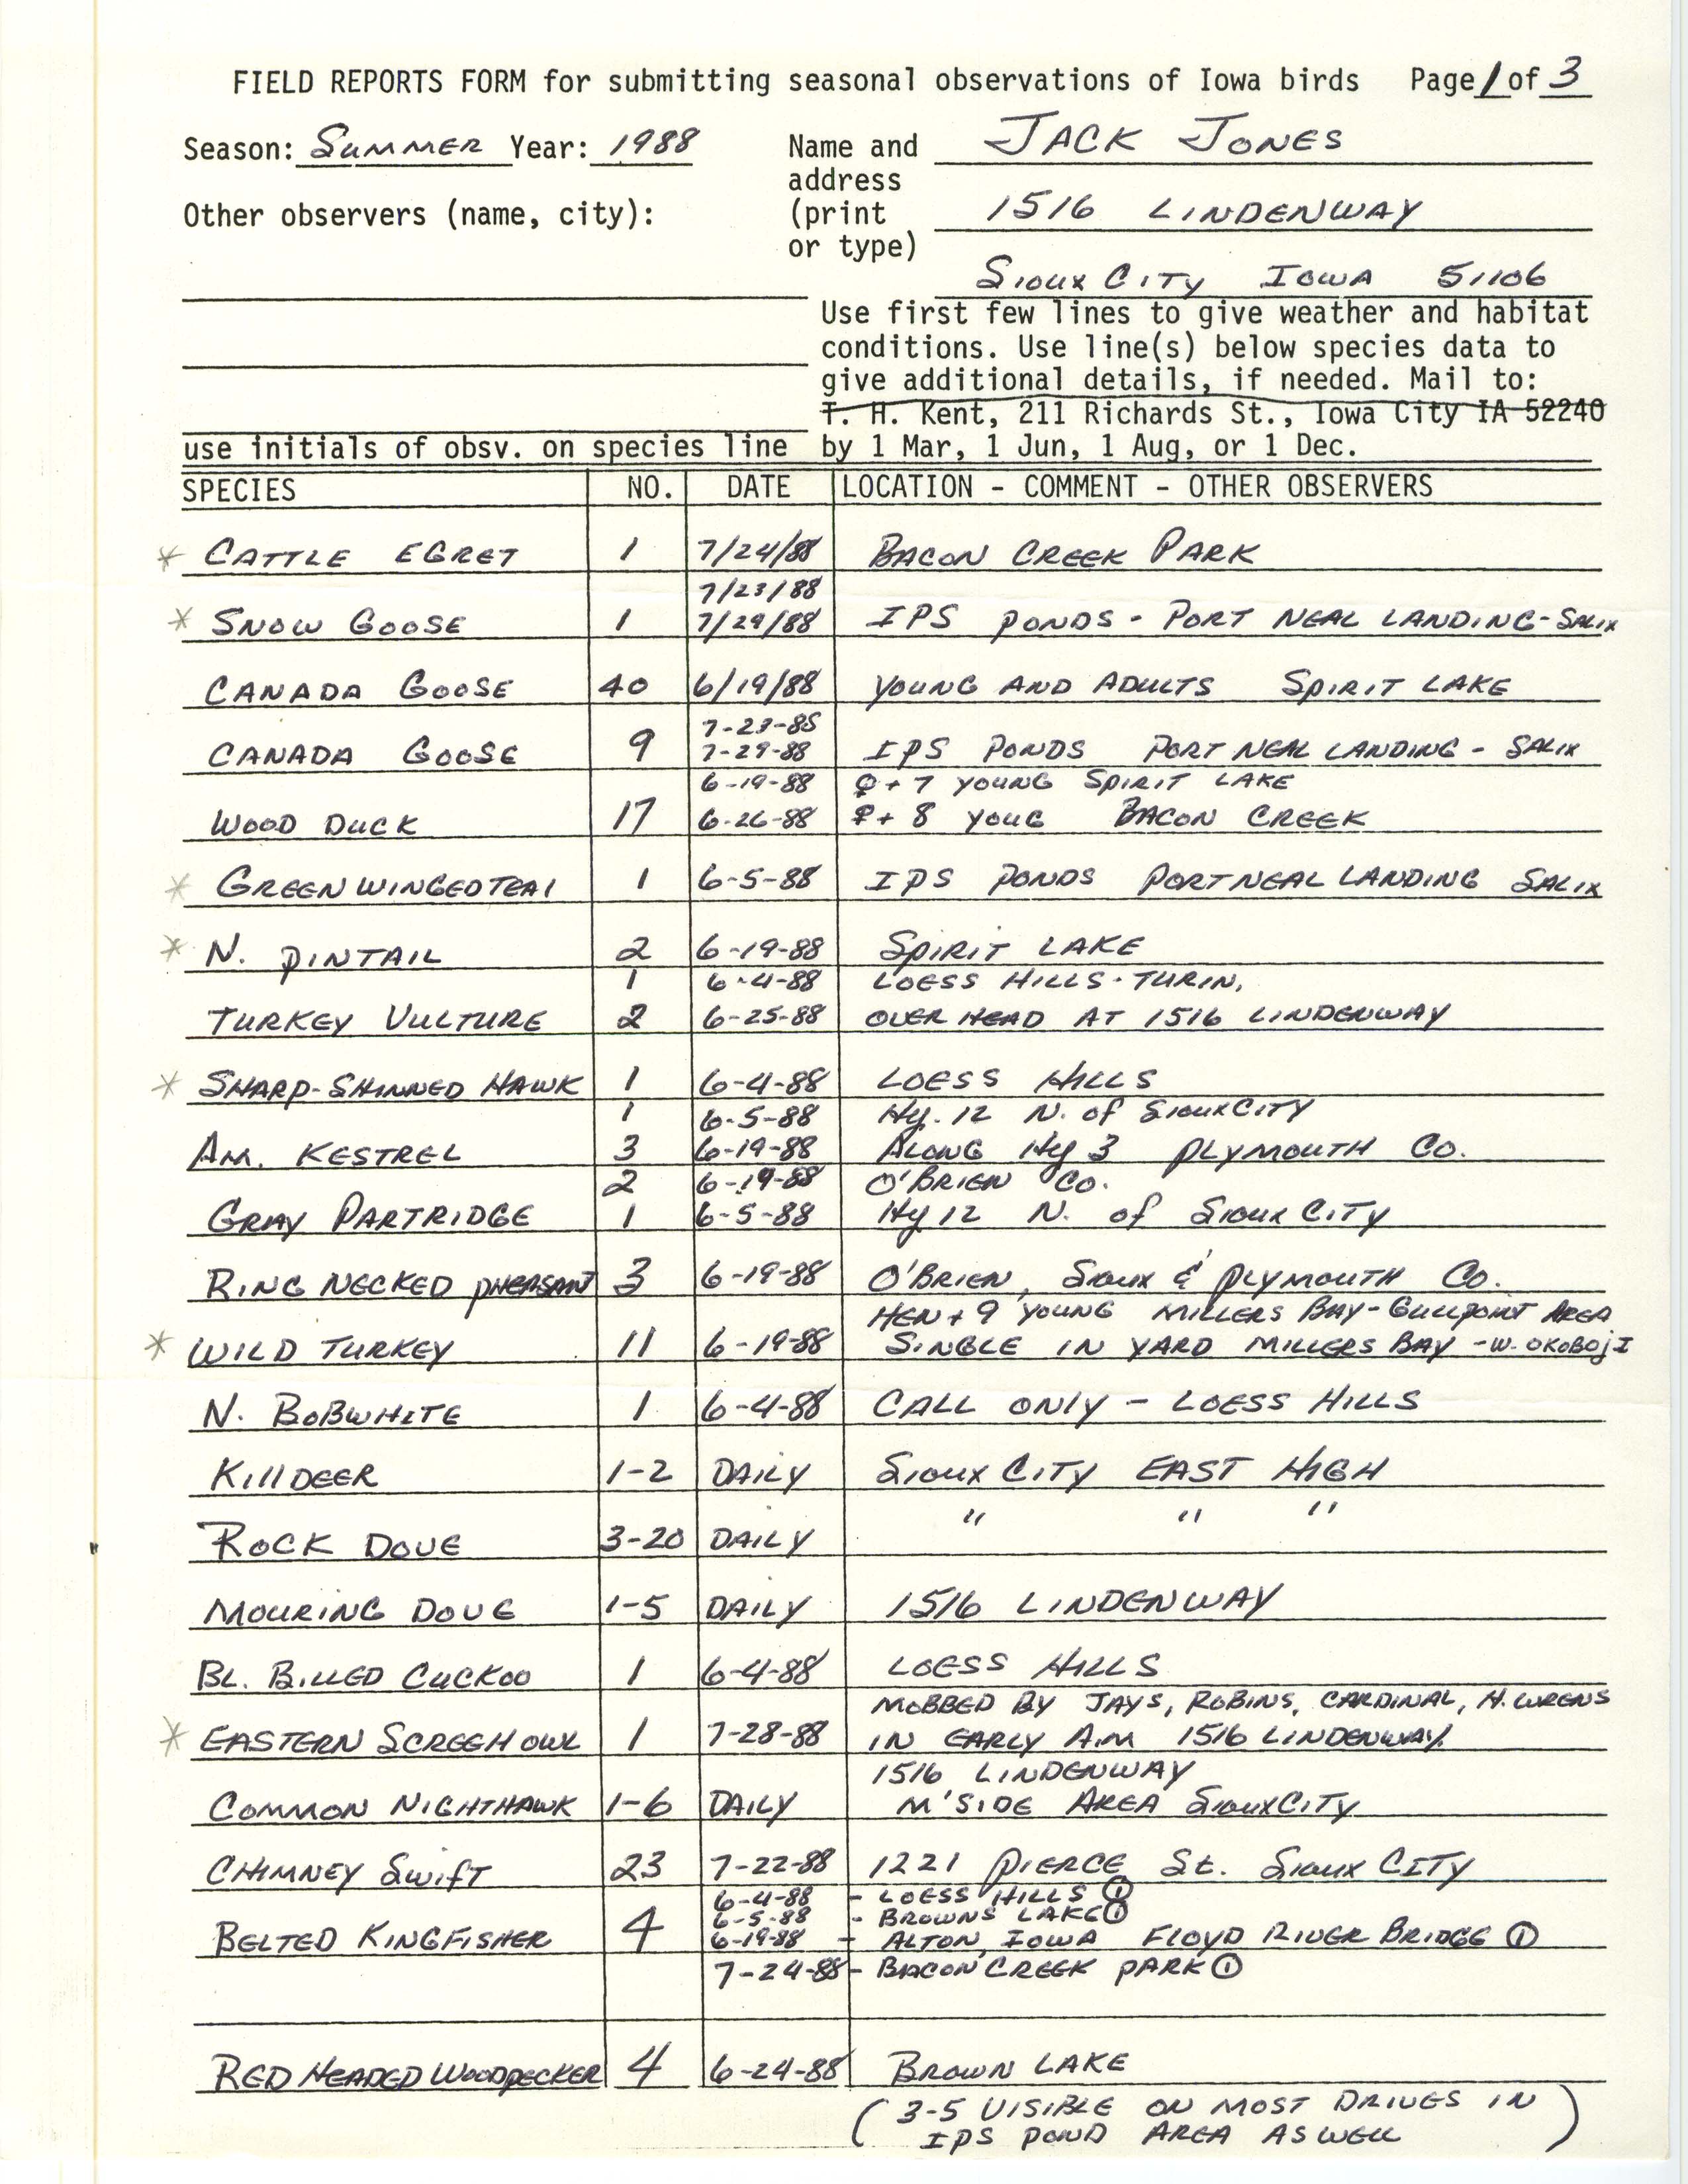 Field reports form for submitting seasonal observations of Iowa birds, Jack Jones, summer 1988